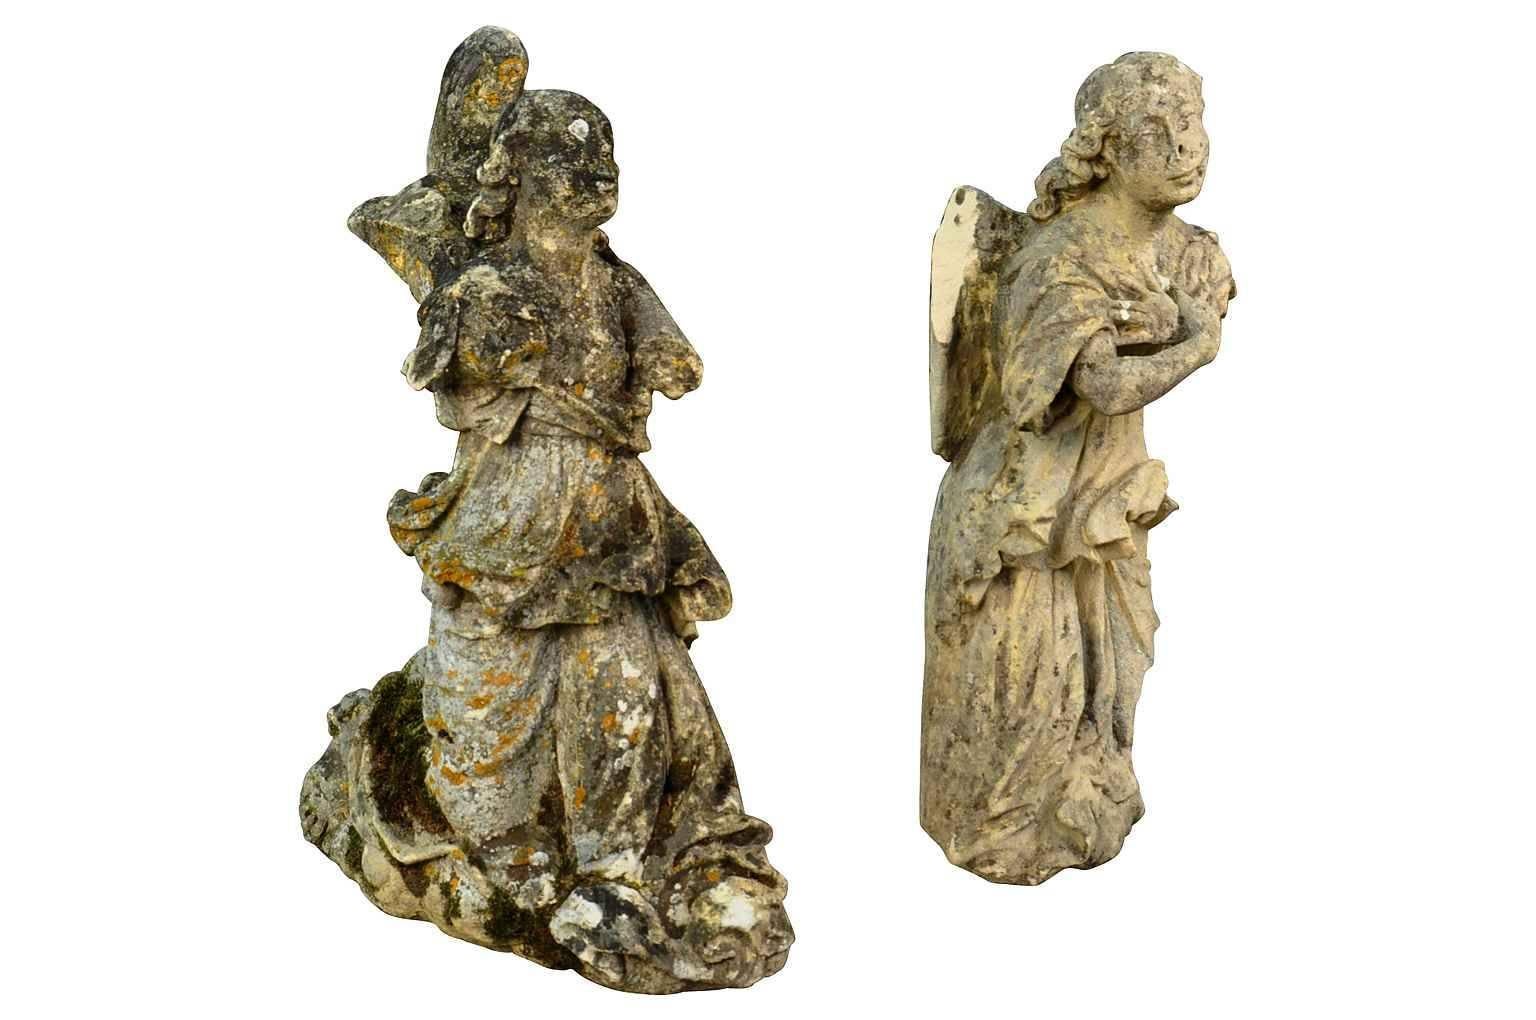 An exceptional and exquisite pair of 18th century French hand carved stone angels from the Provence region. Breathtaking - a magnificent addition to any interior or garden.